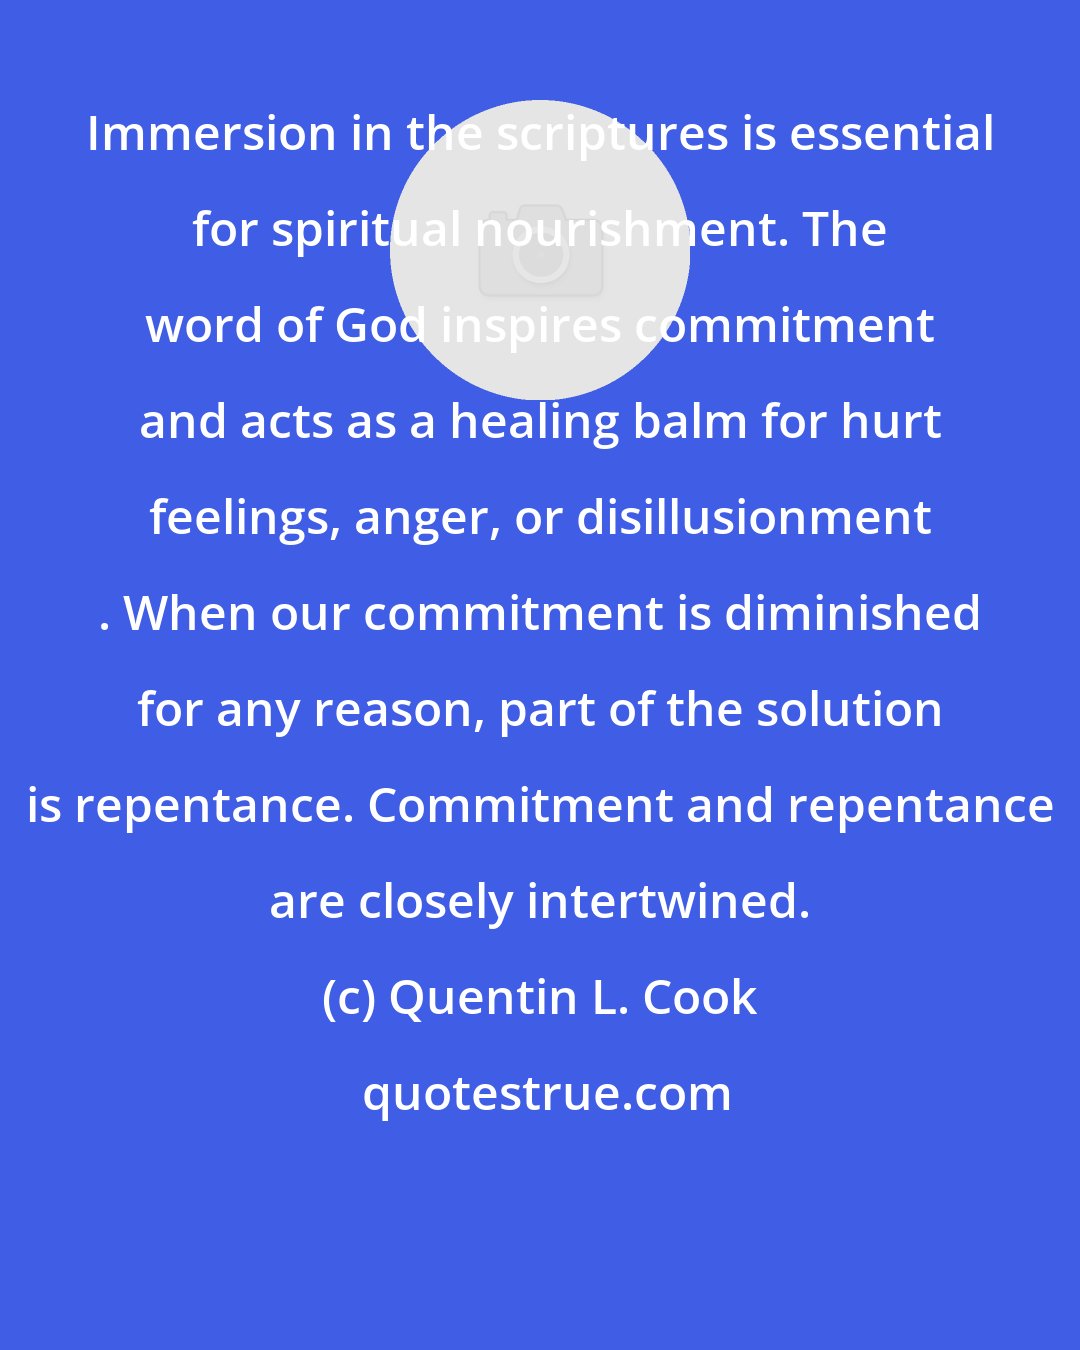 Quentin L. Cook: Immersion in the scriptures is essential for spiritual nourishment. The word of God inspires commitment and acts as a healing balm for hurt feelings, anger, or disillusionment . When our commitment is diminished for any reason, part of the solution is repentance. Commitment and repentance are closely intertwined.